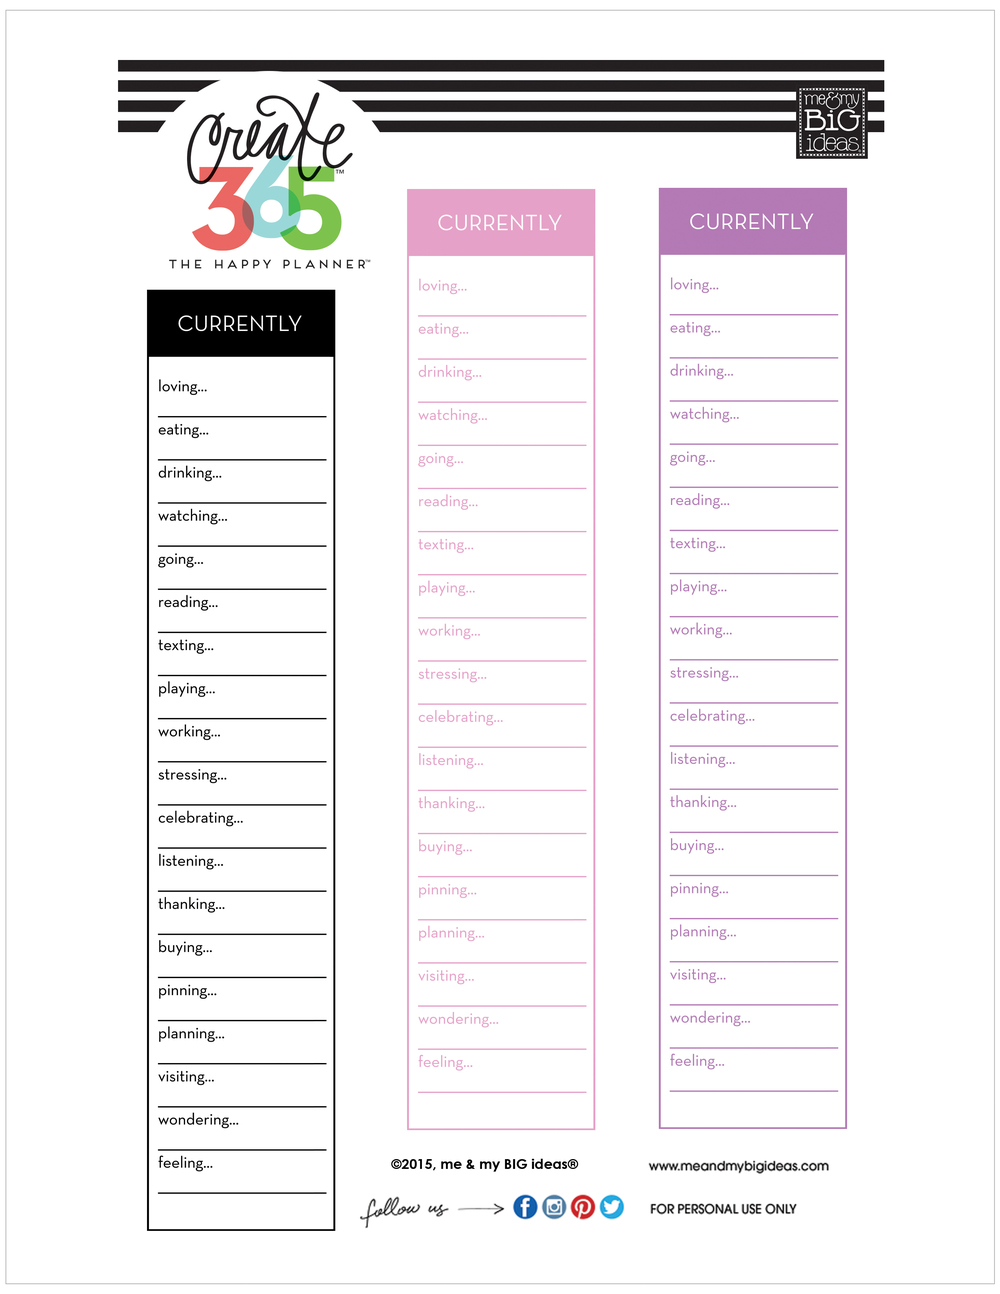 'CURRENTLY' free printables for The Happy Planner™ — me & my BIG ideas